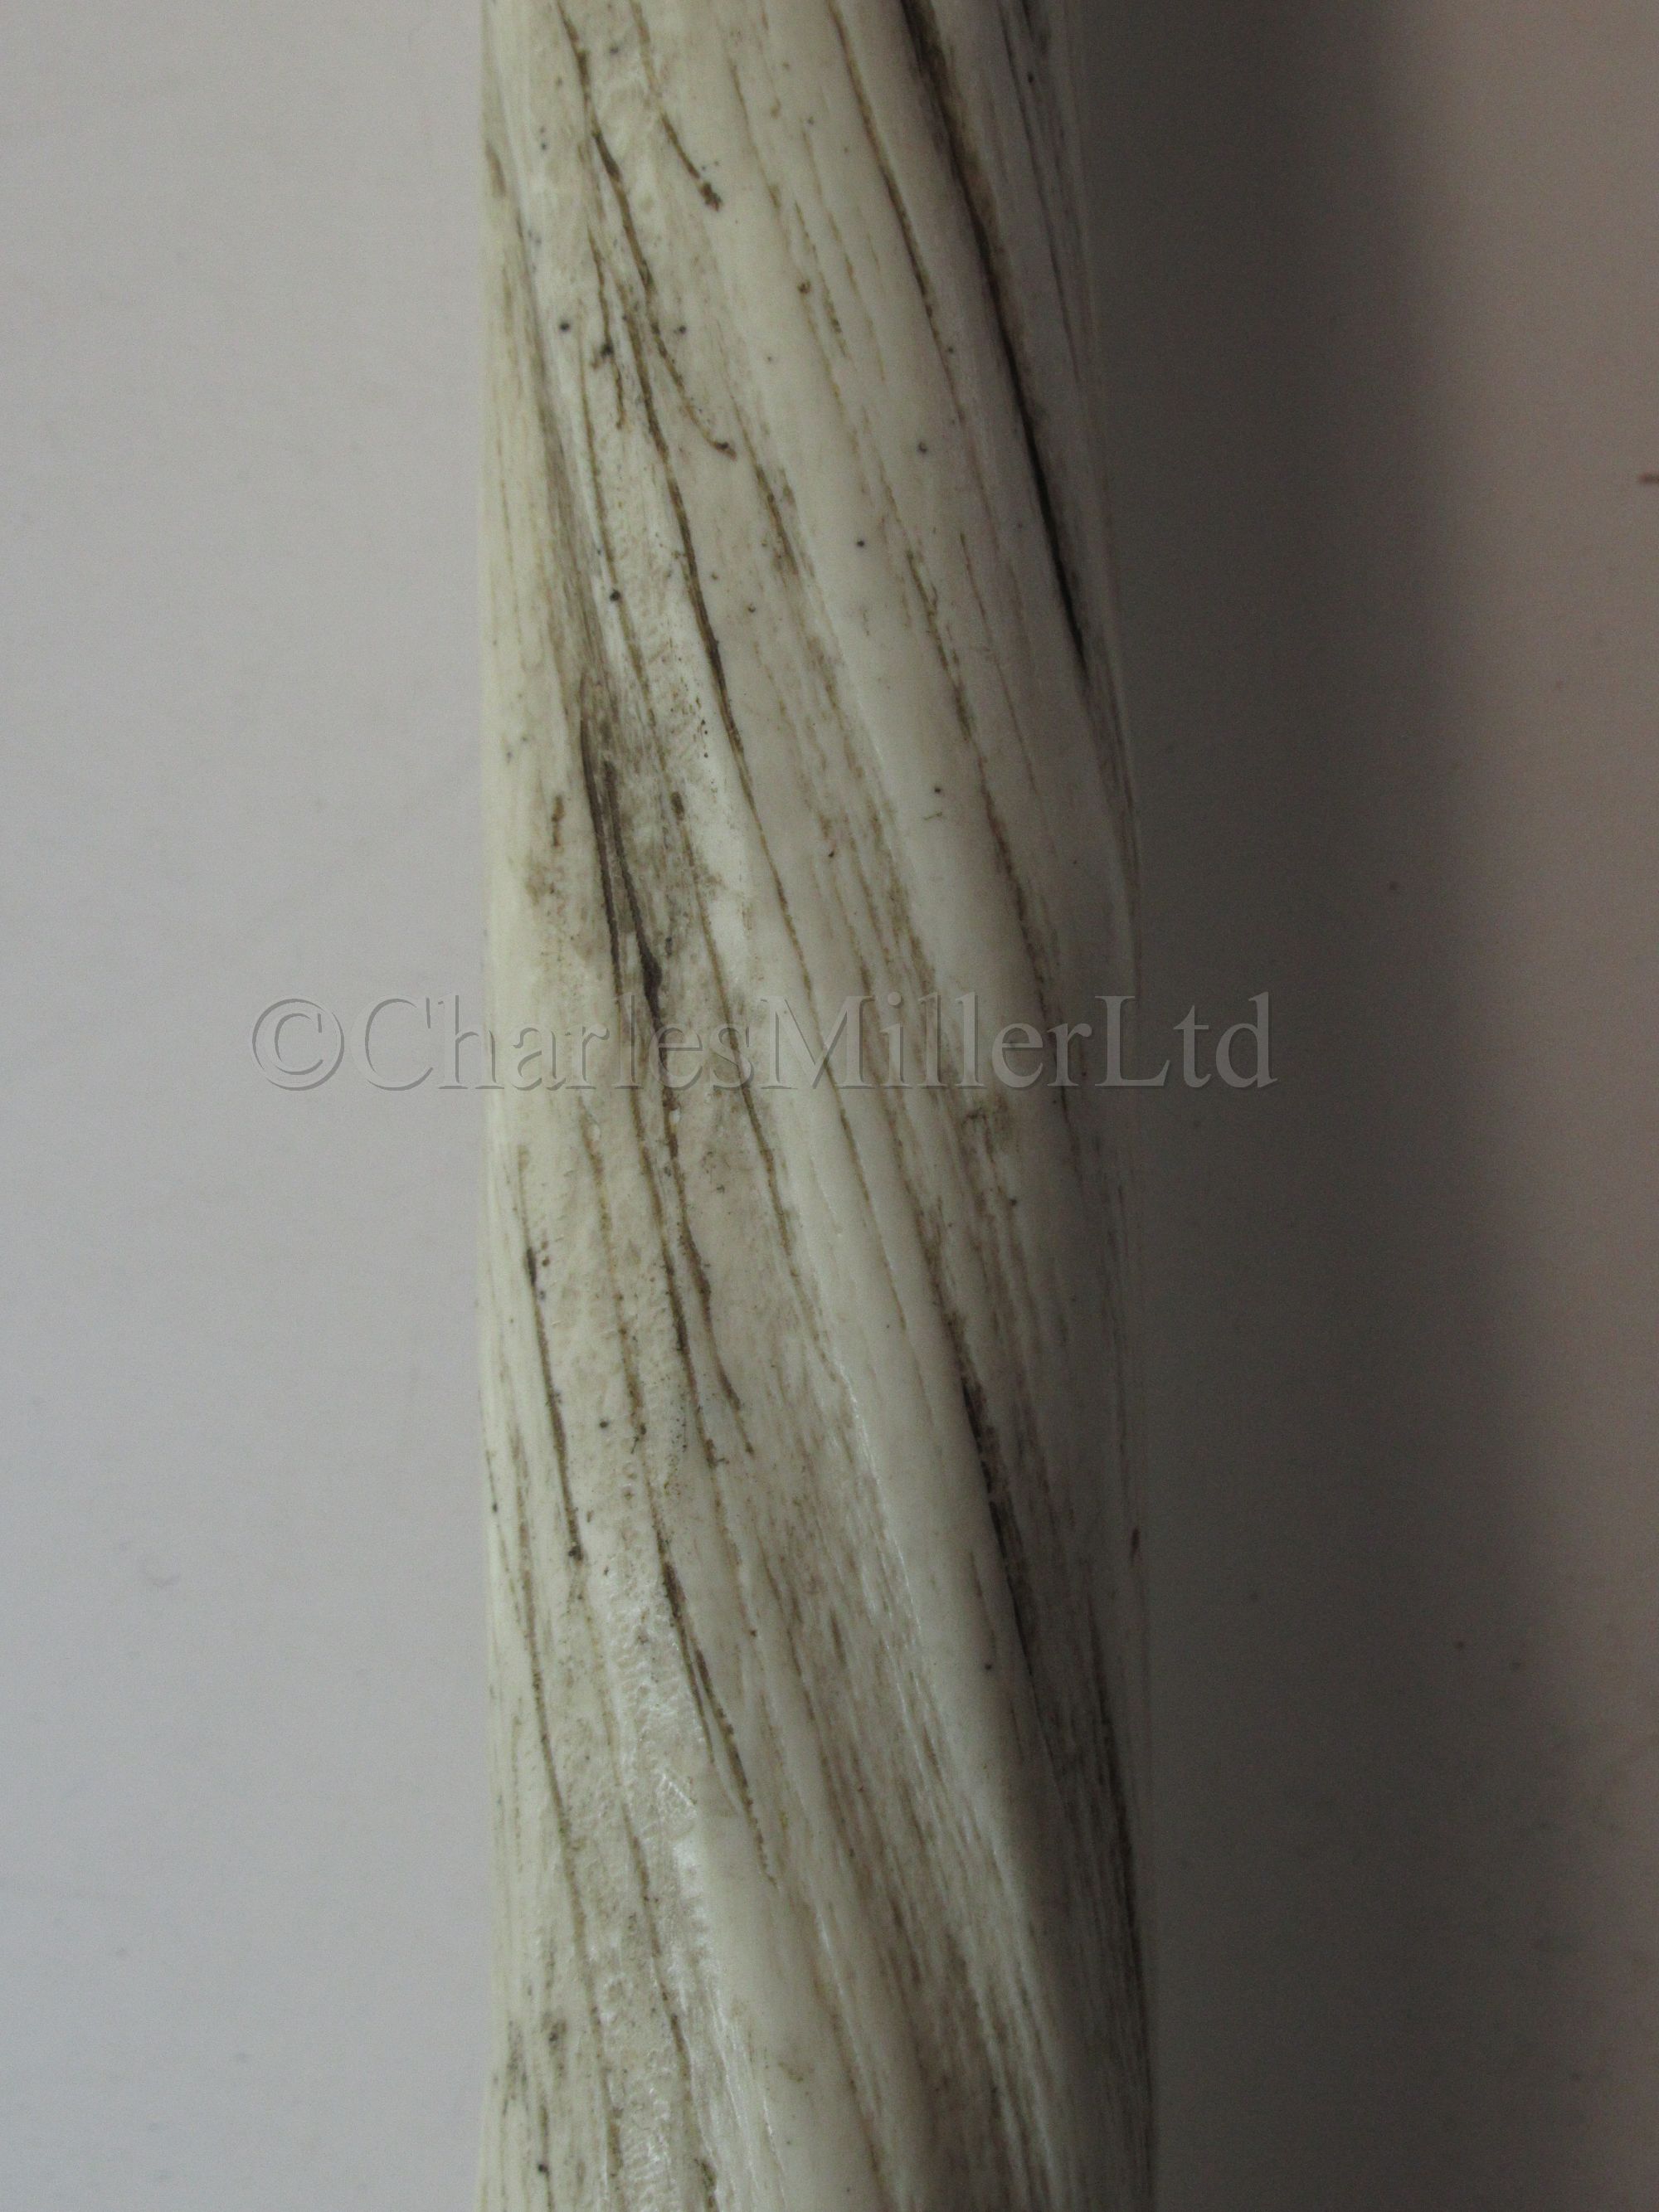 A FACSIMILE NARWHAL TUSK, MODERN - Image 3 of 3